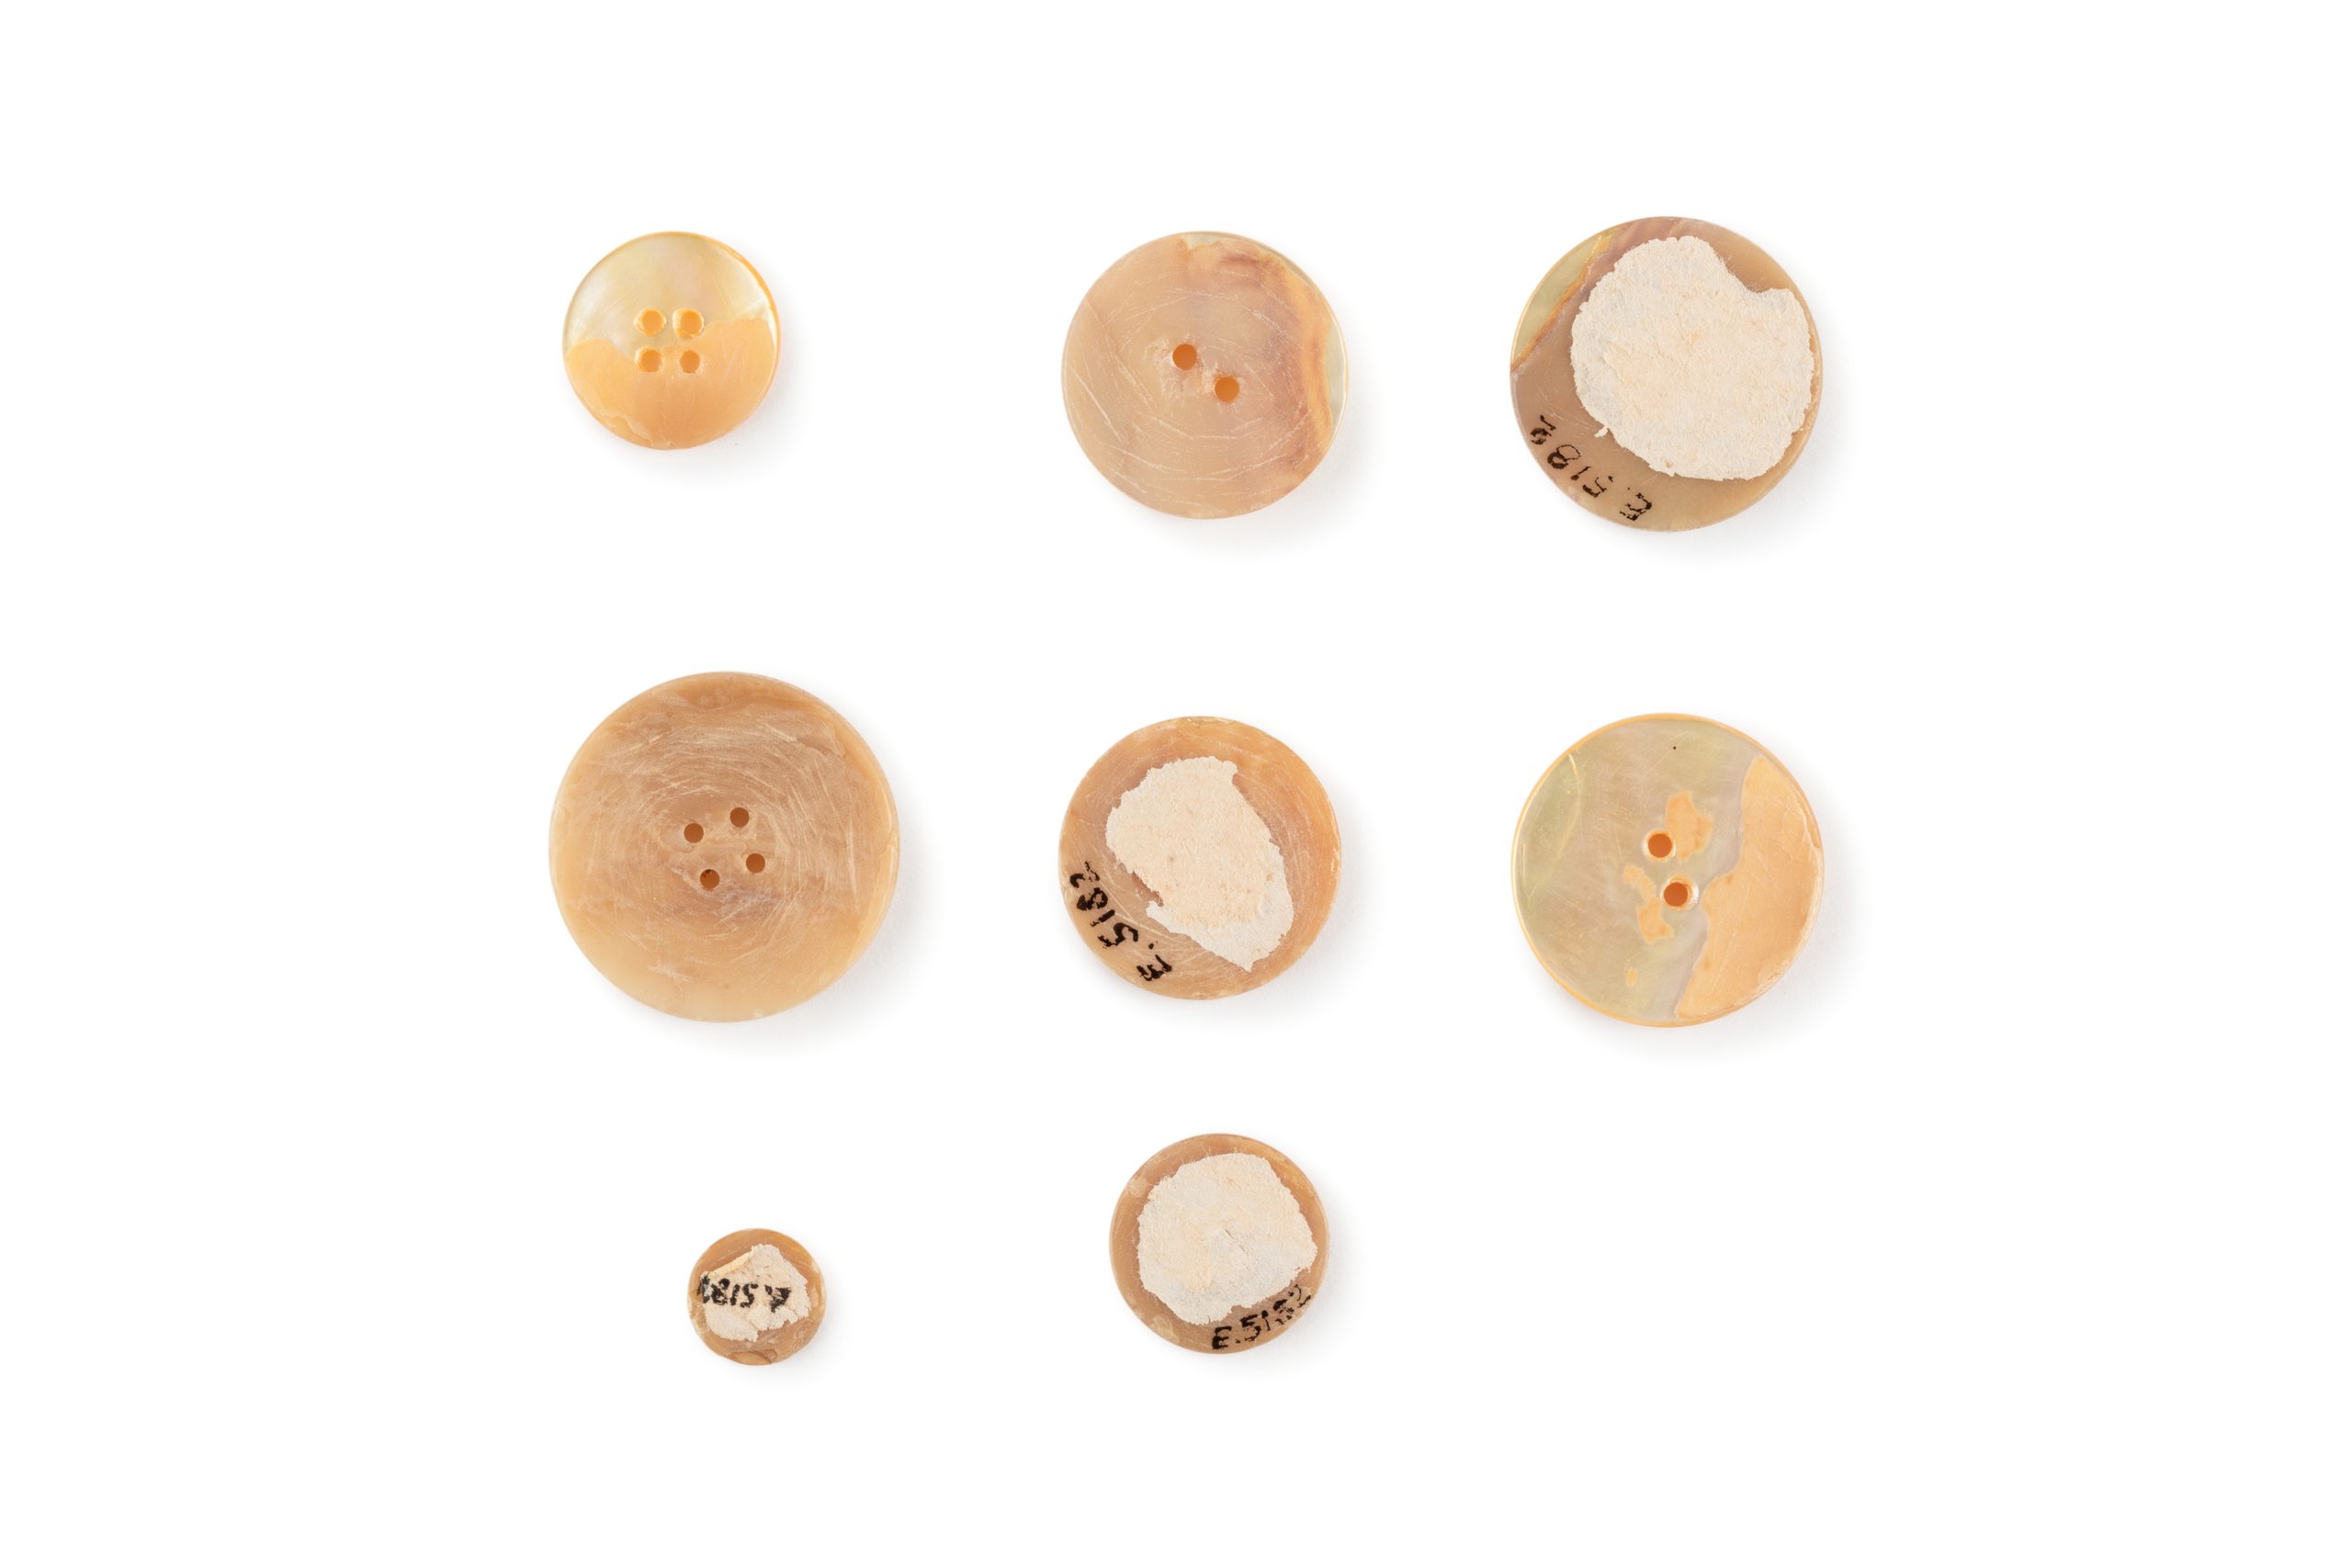 A didactic display illustrating pearl button manufacture